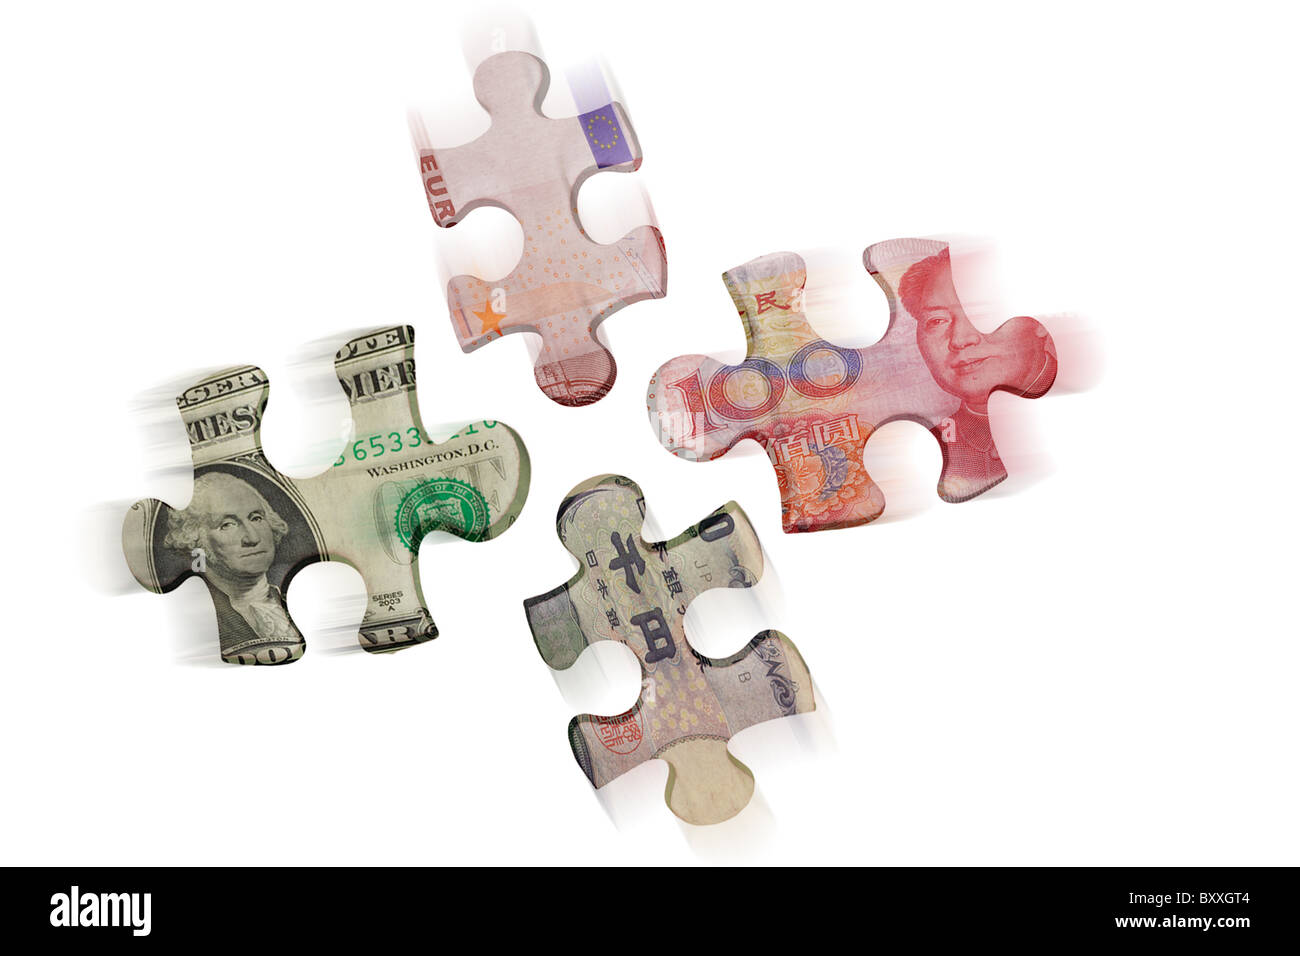 International currencies and unmatched jigsaw puzzle pieces on white background Stock Photo